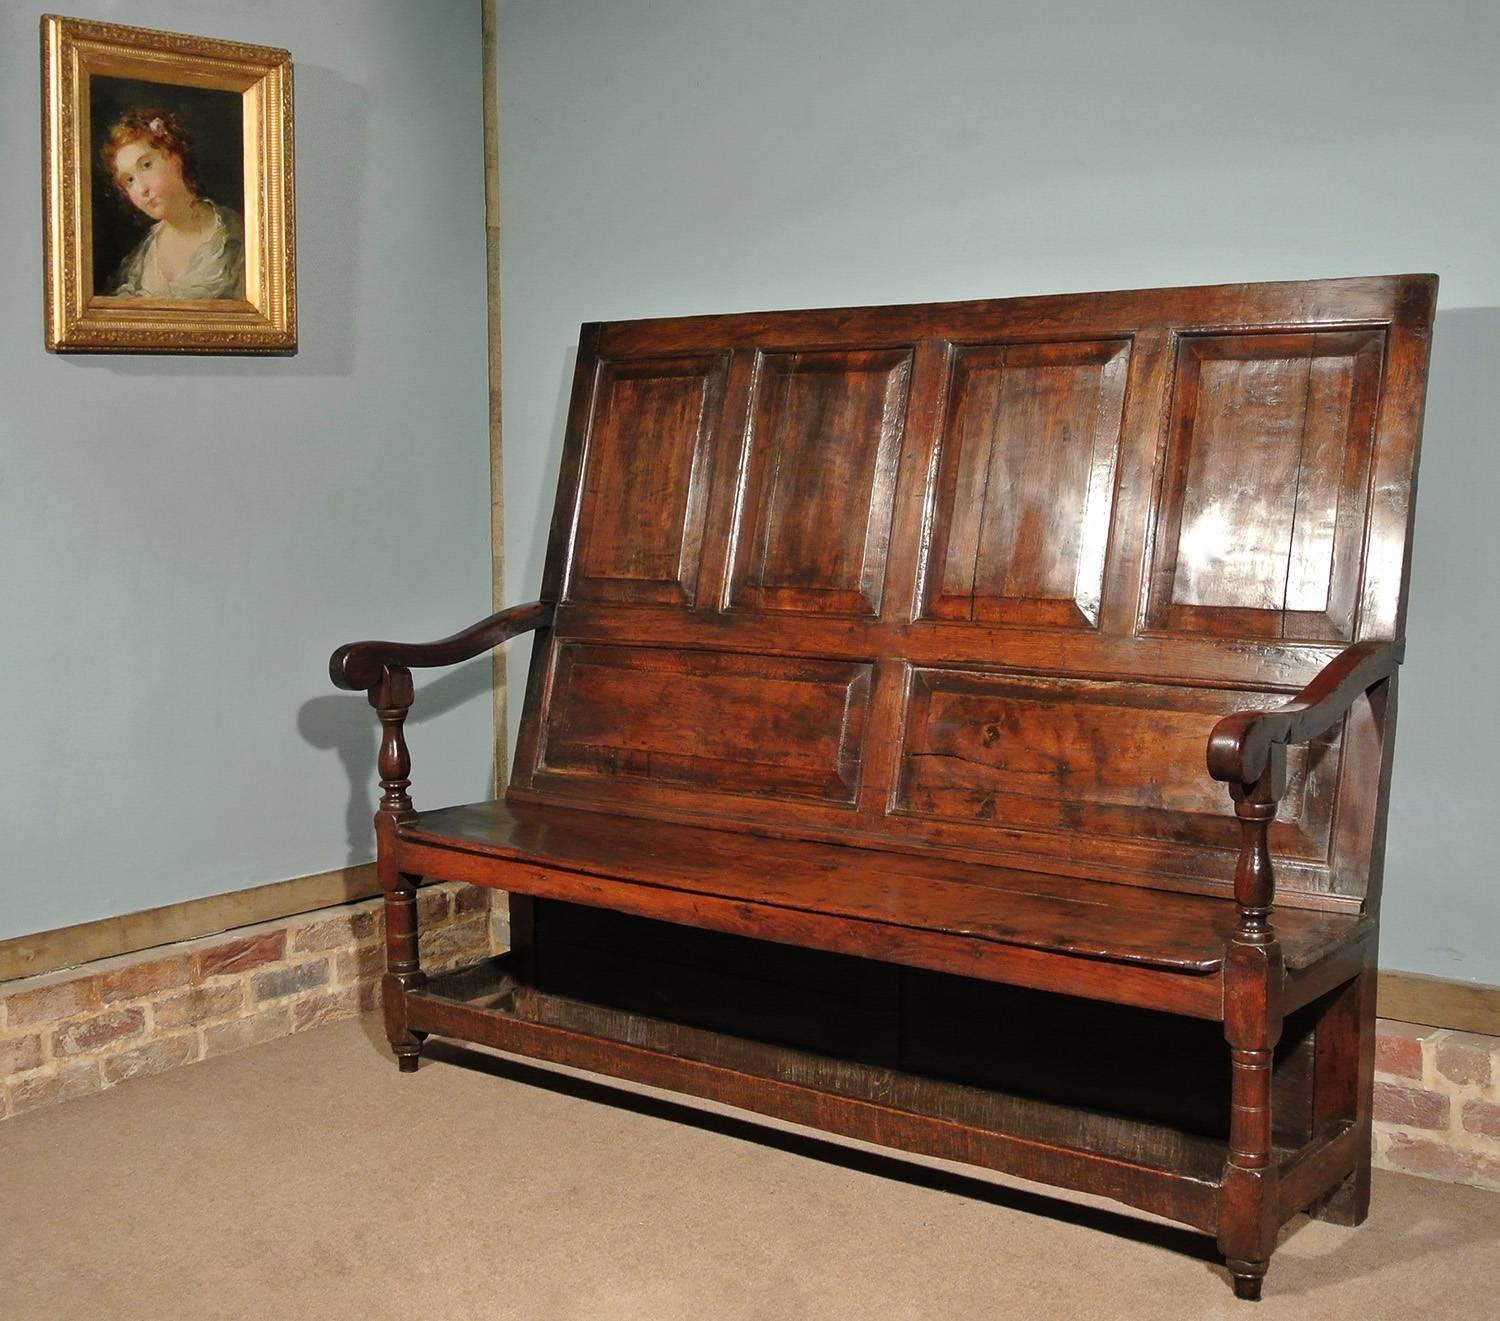 British Beautiful Tall and Narrow 17th Century Oak Settle Bench, circa 1680 For Sale